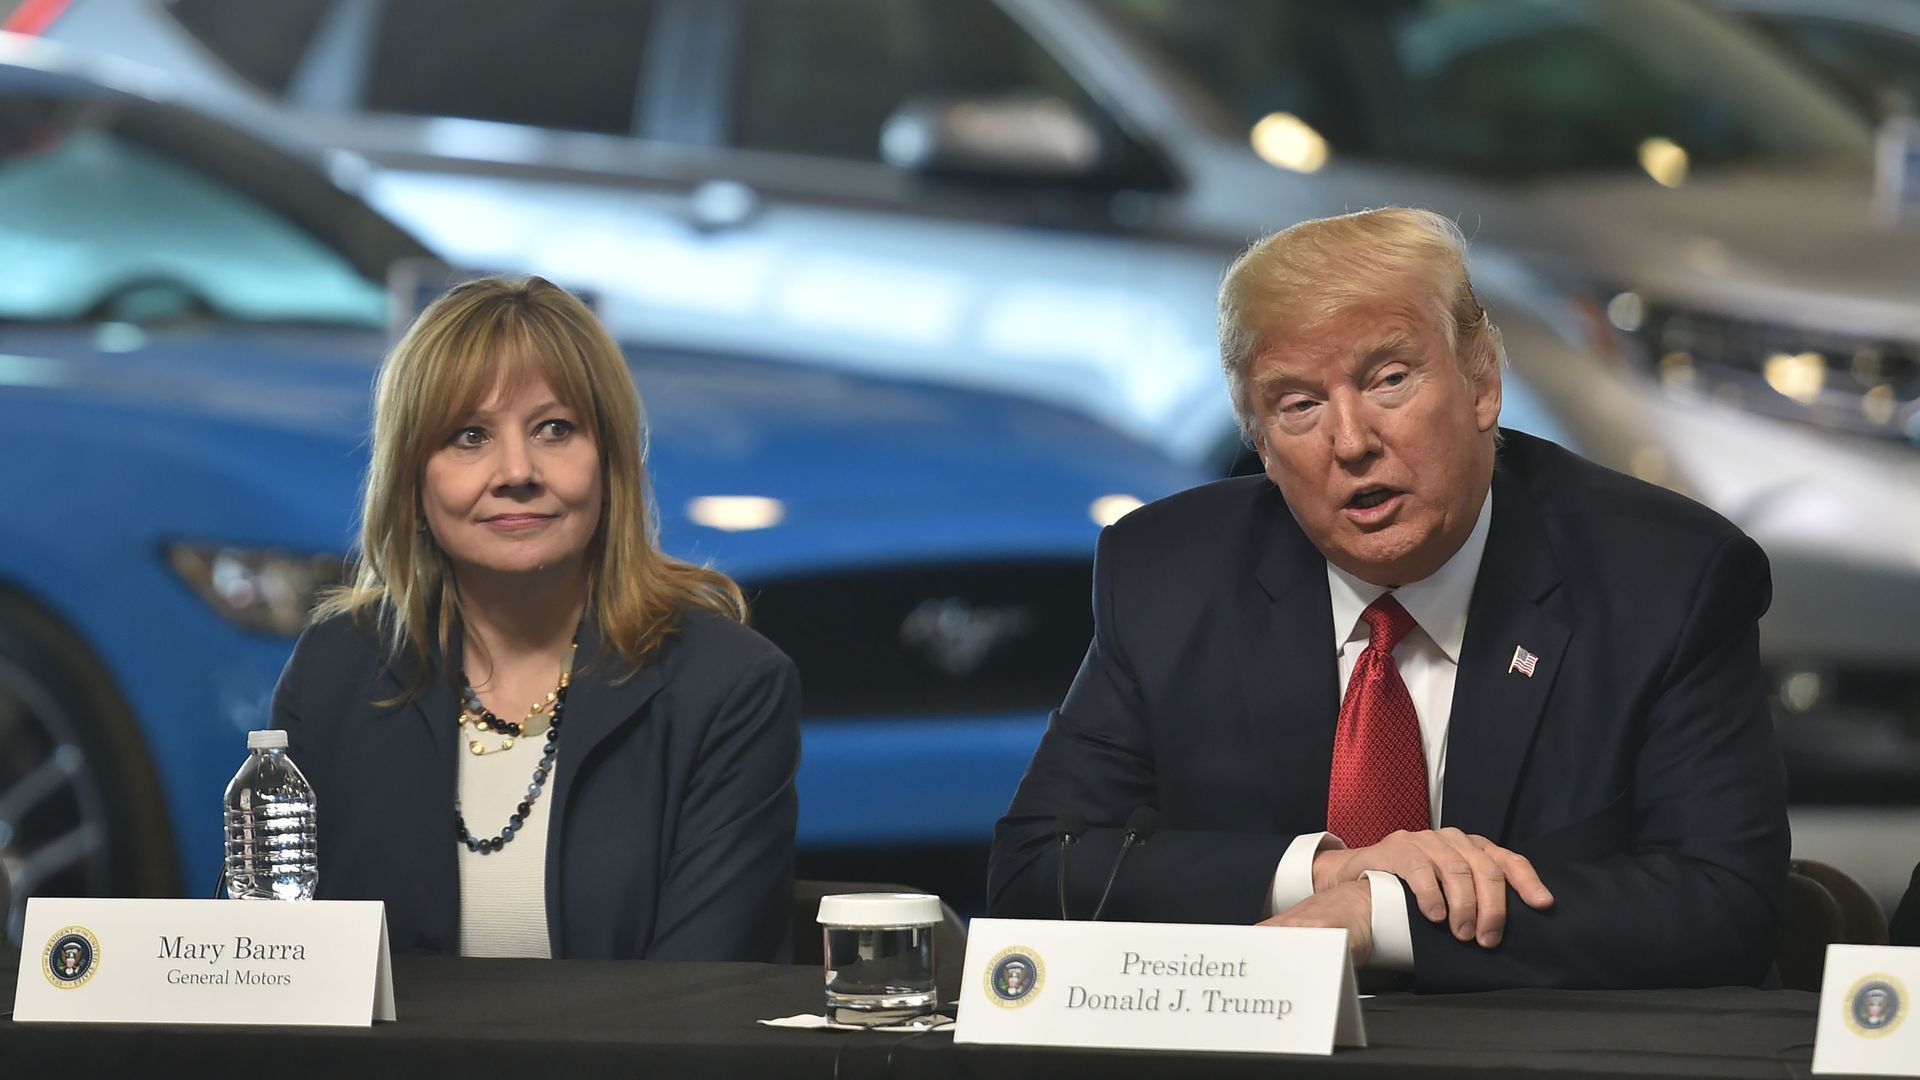 President Trump and GM CEO Mary Barra